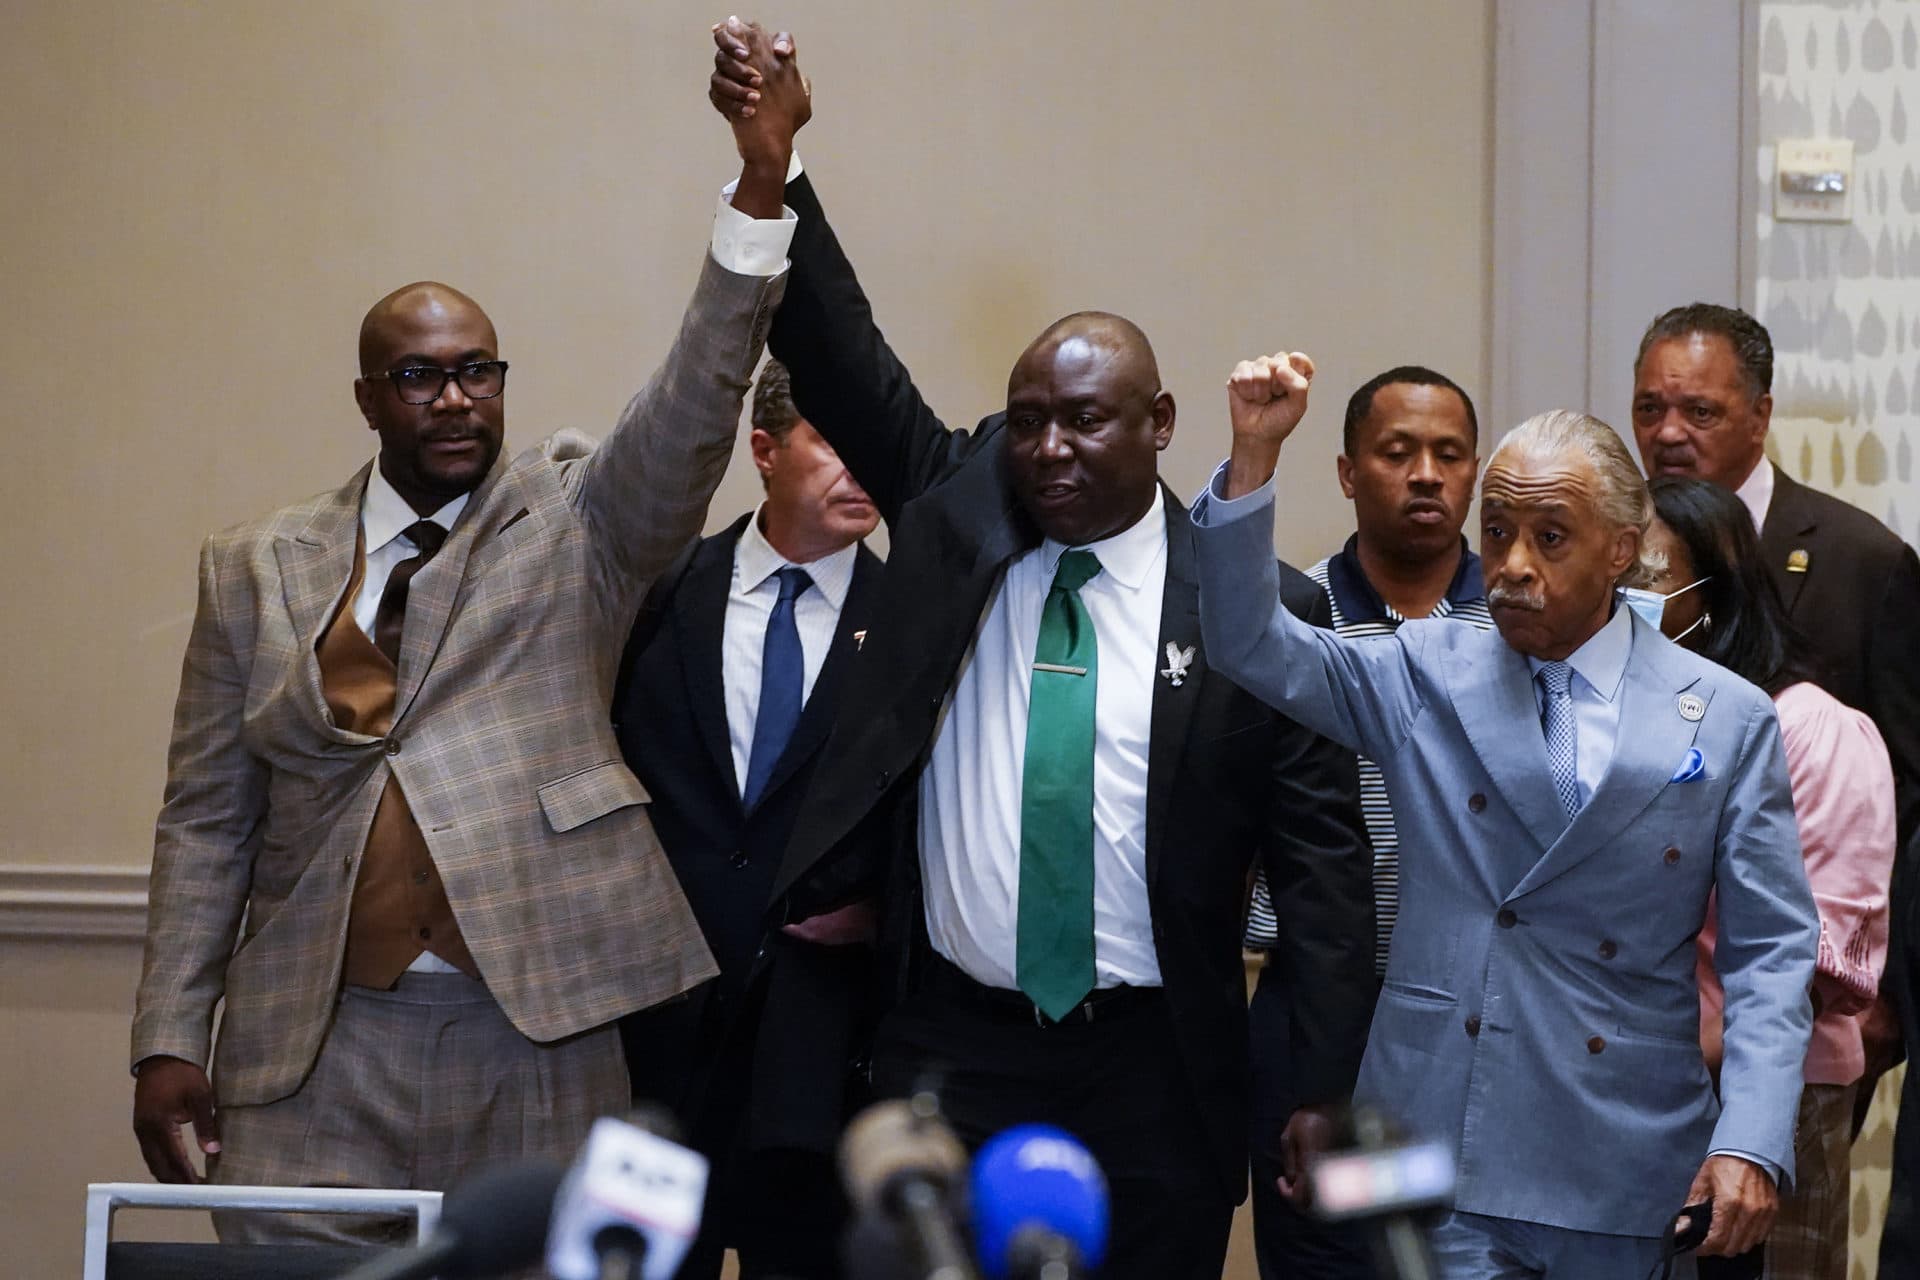 Philonise Floyd, Attorney Ben Crump and the Rev, Al Sharpton, from left, react after a guilty verdict was announced Tuesday at the trial of Derek Chauvin in Minneapolis, Minn. (Julio Cortez/AP)